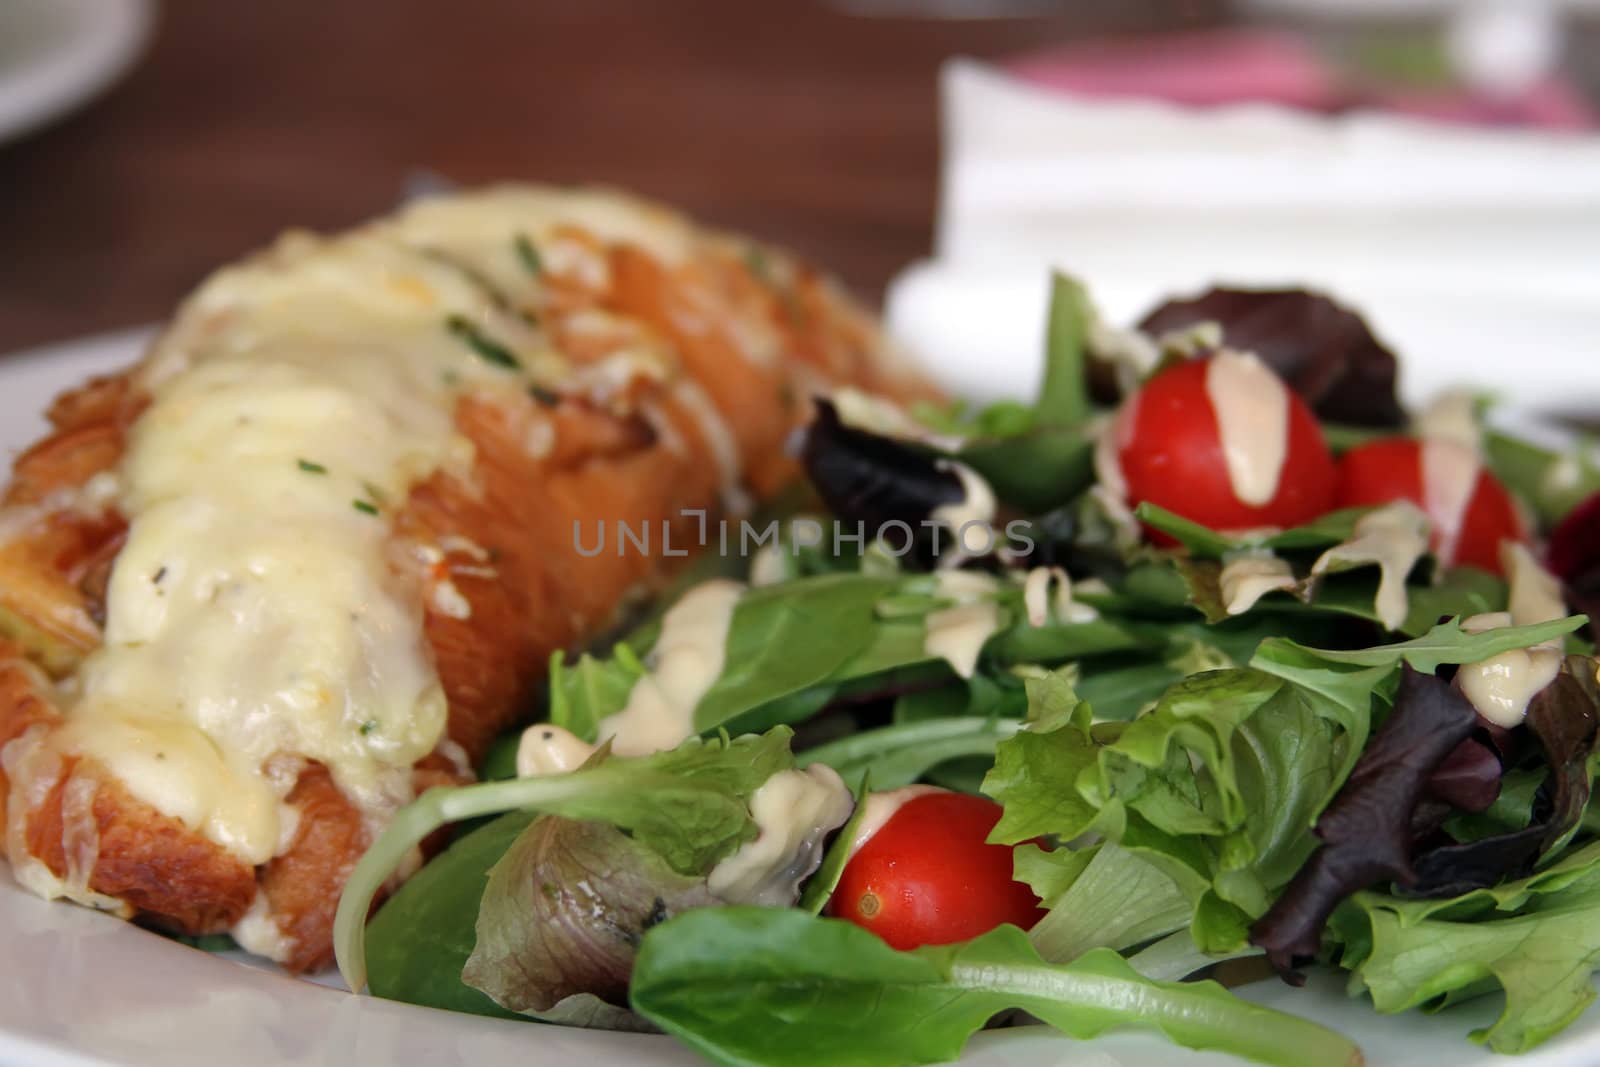 Chicken Croissant with cheese and a side of salad